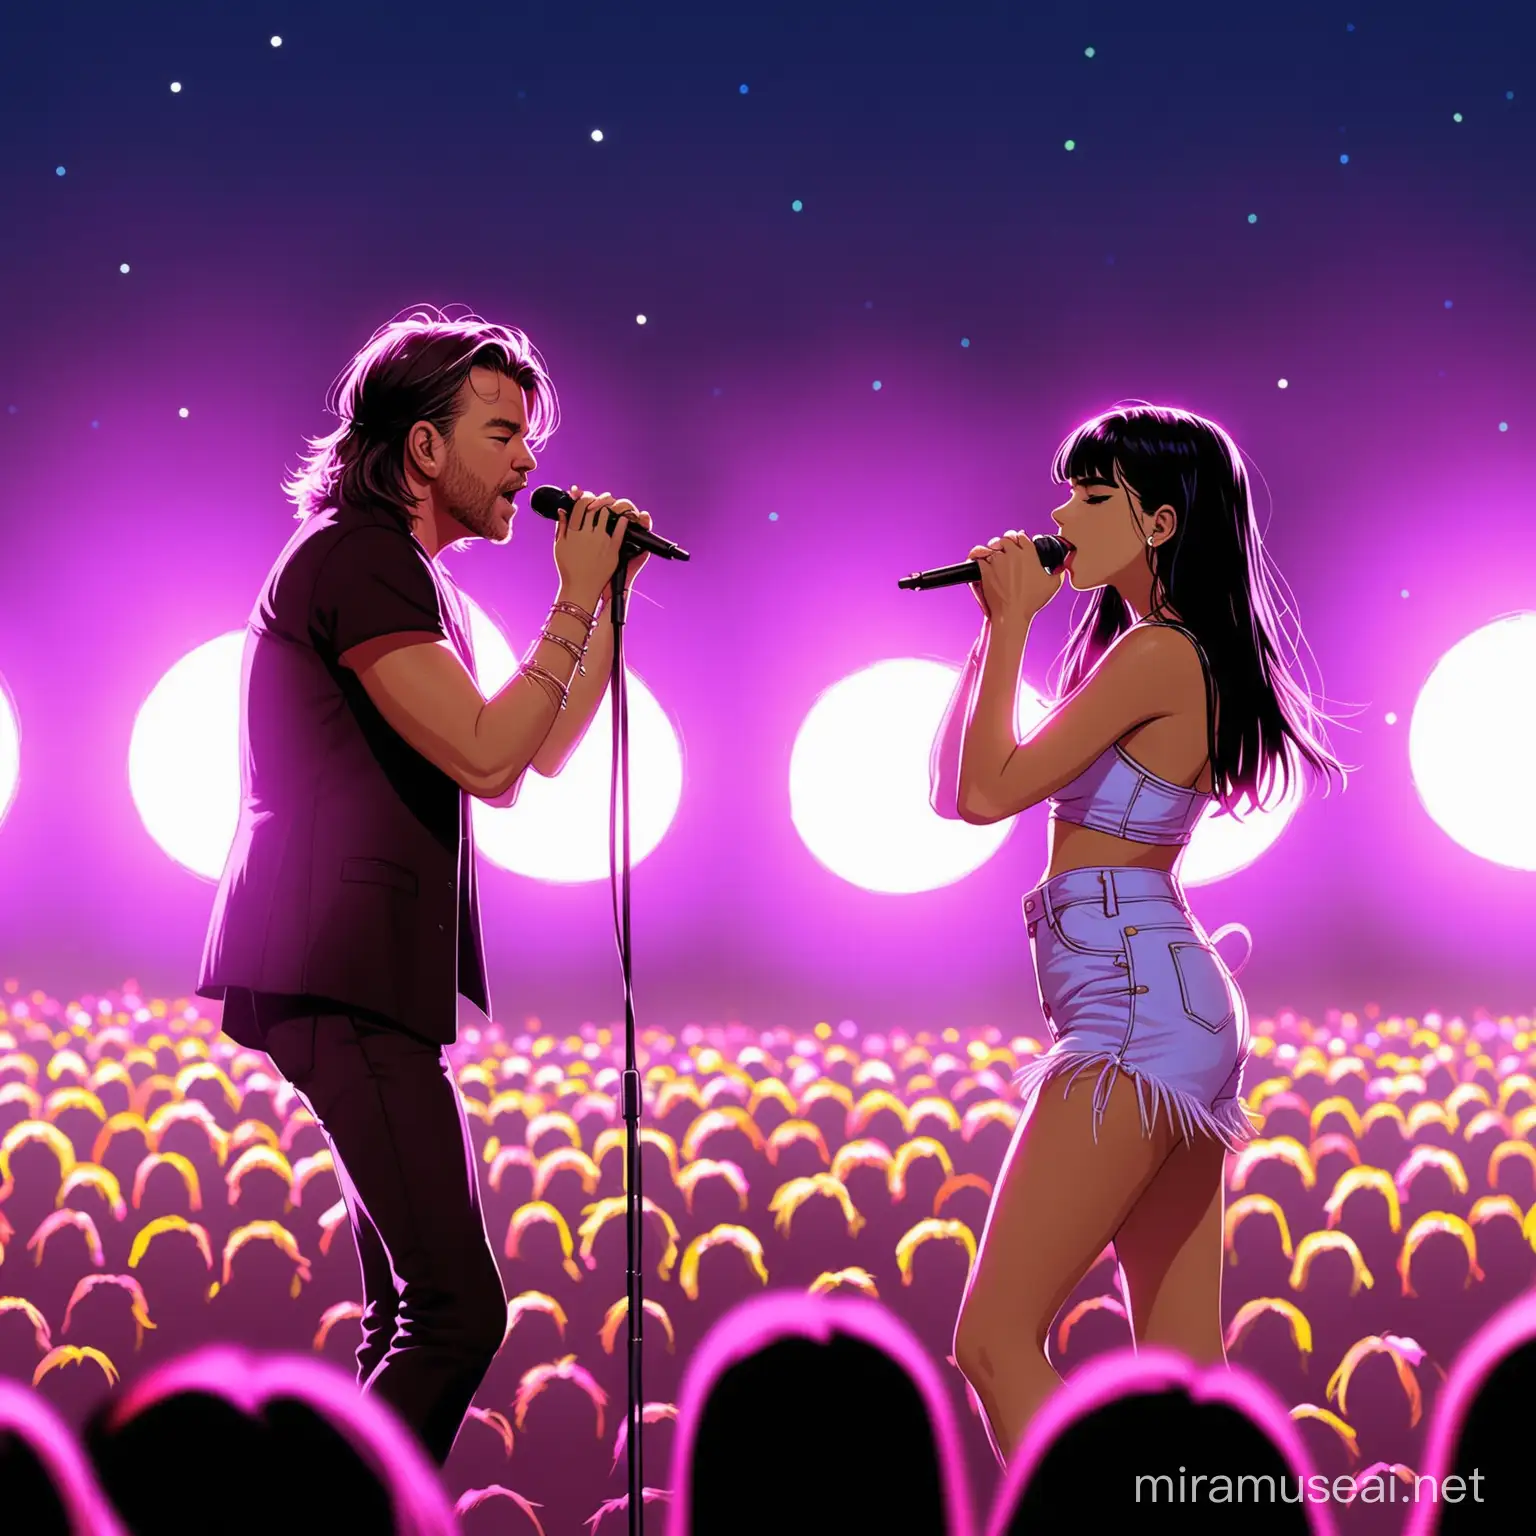 A young John Mellencamp and Dua Lipa performing at Woodstock on stage at night with colored lights